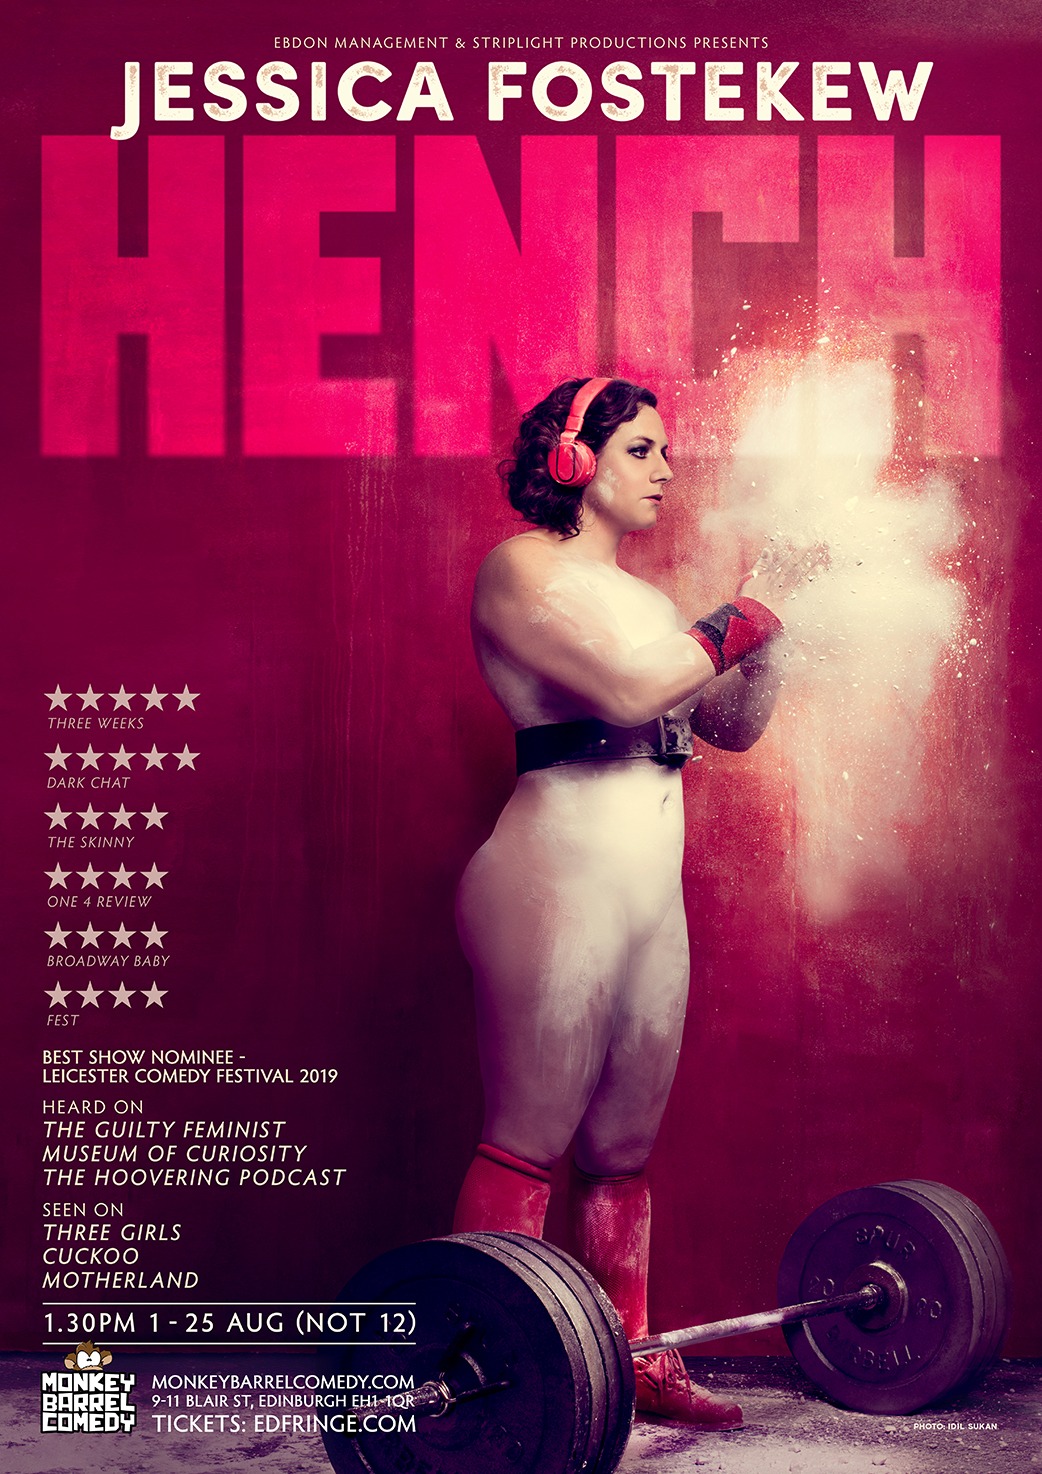 The poster for Jessica Fostekew: Hench